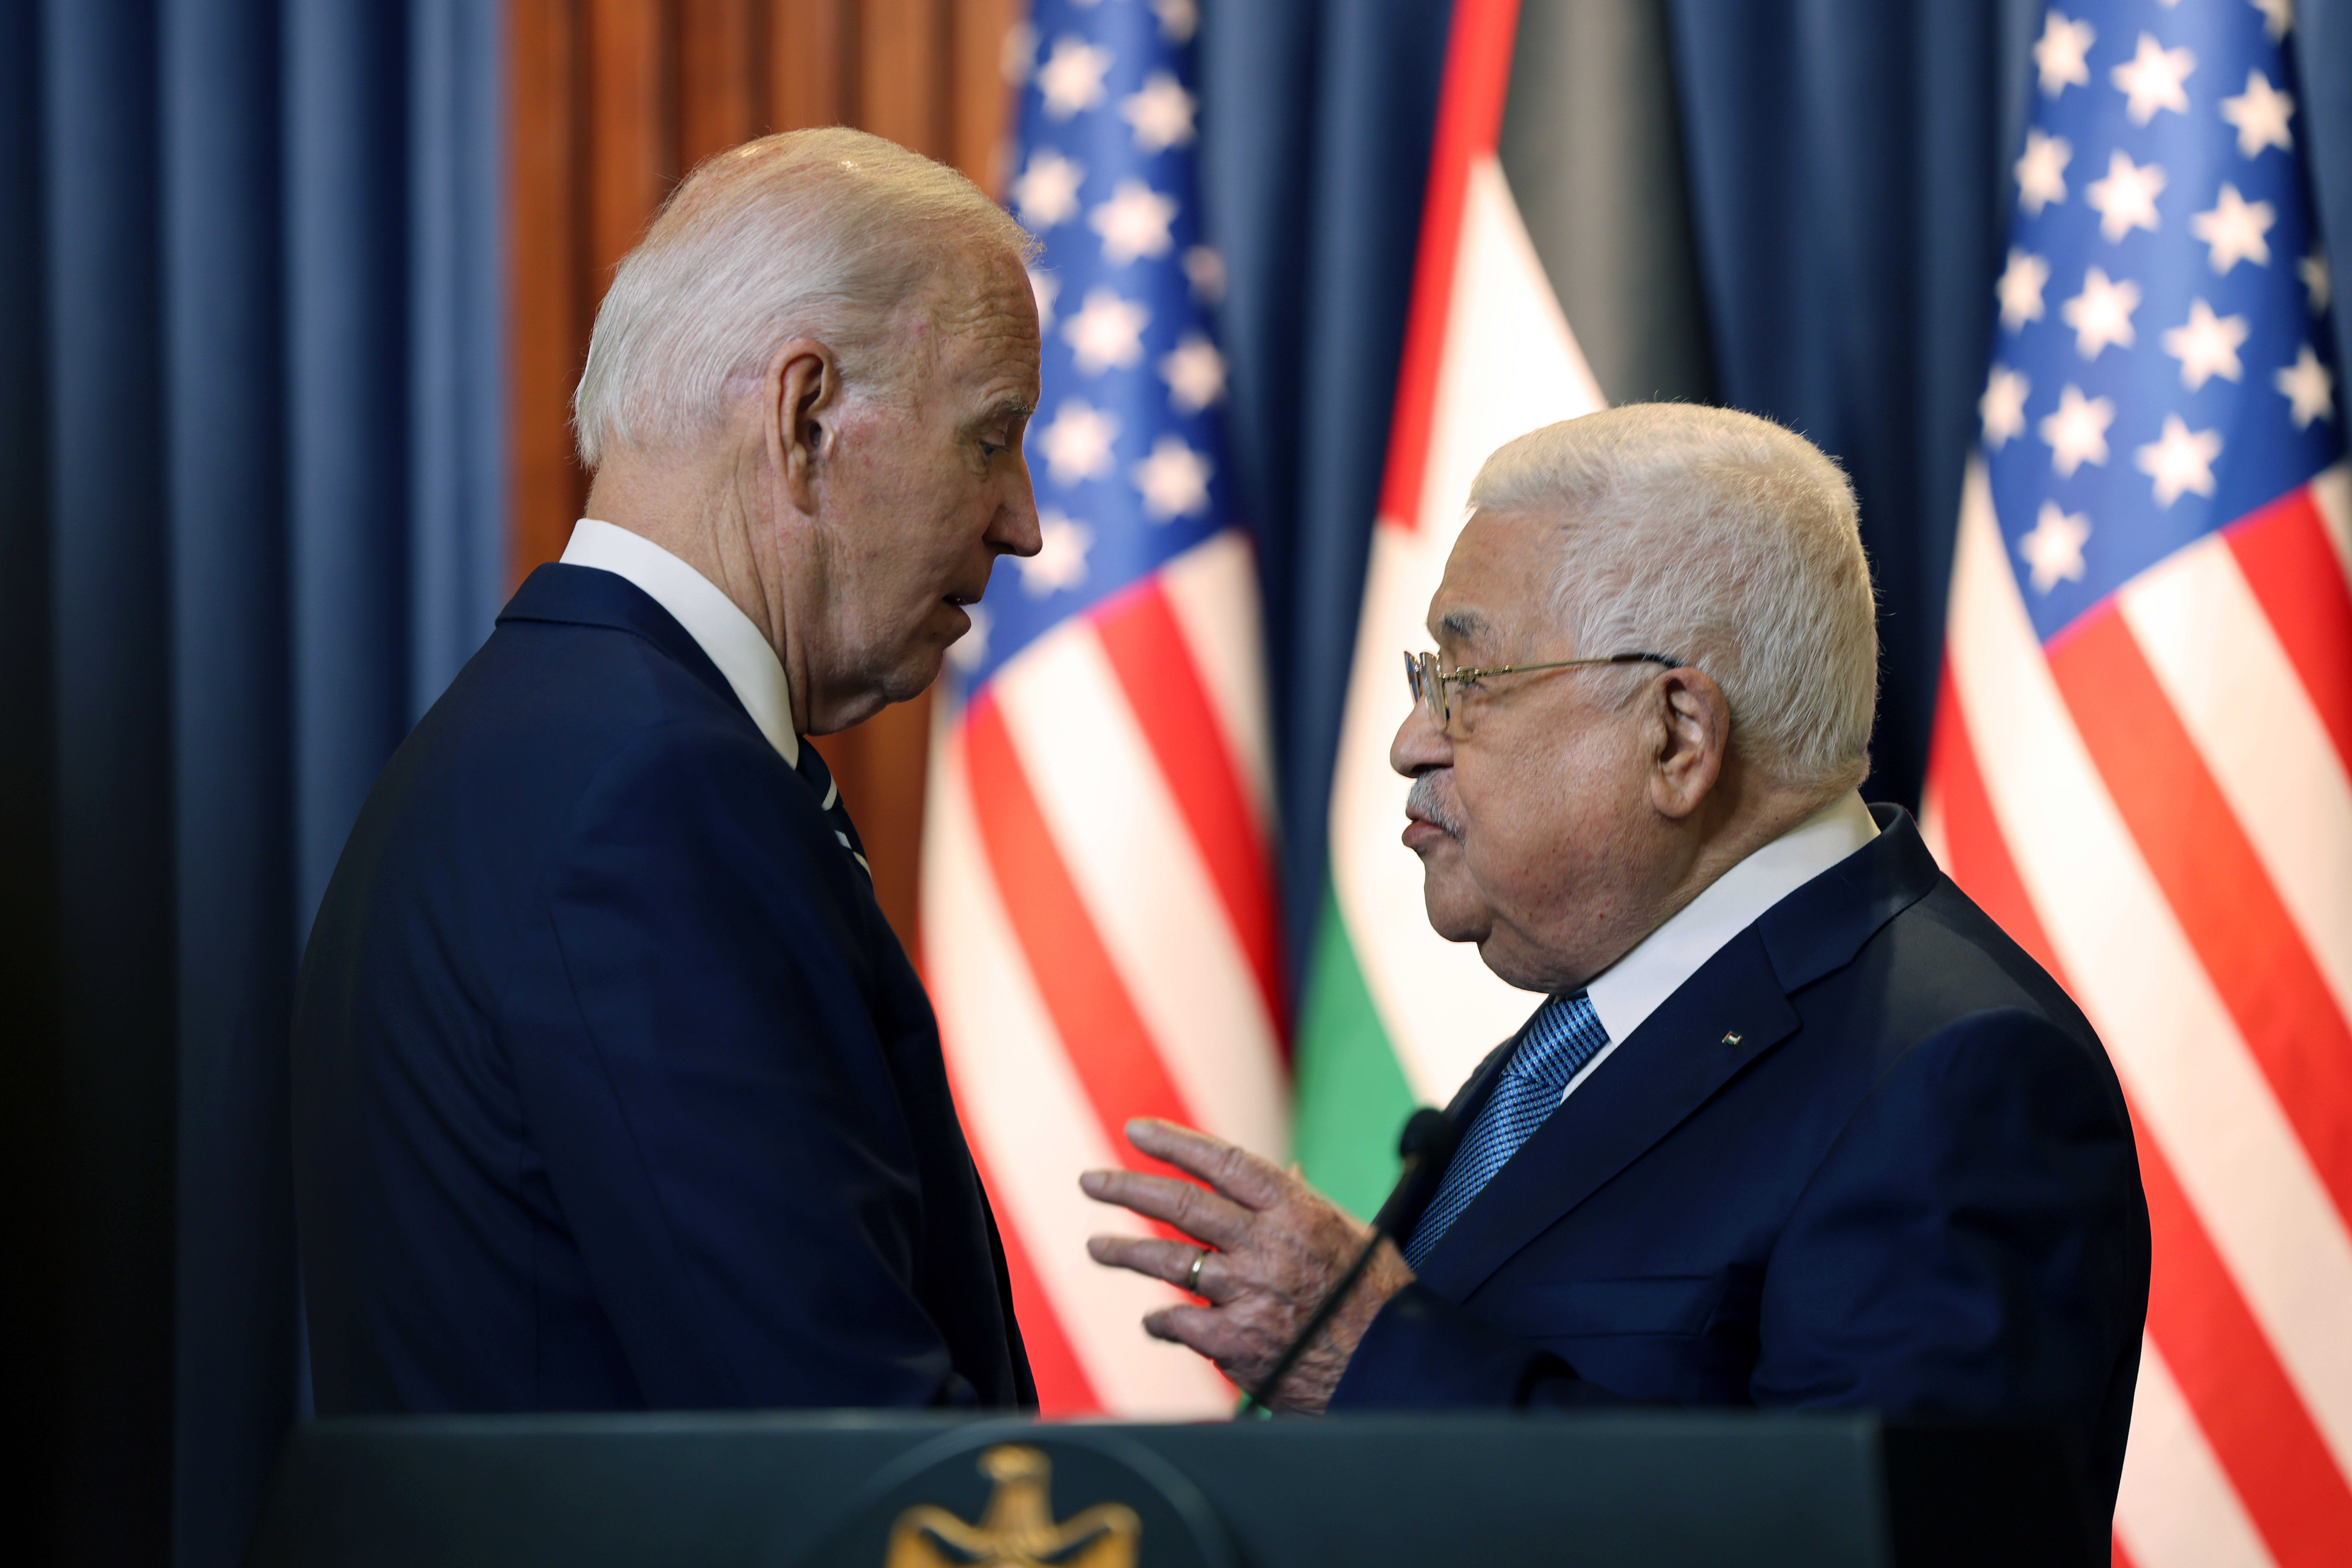 Biden cancels the Jordanian leg of his tour in the Middle East after canceling the two leaders’ summit